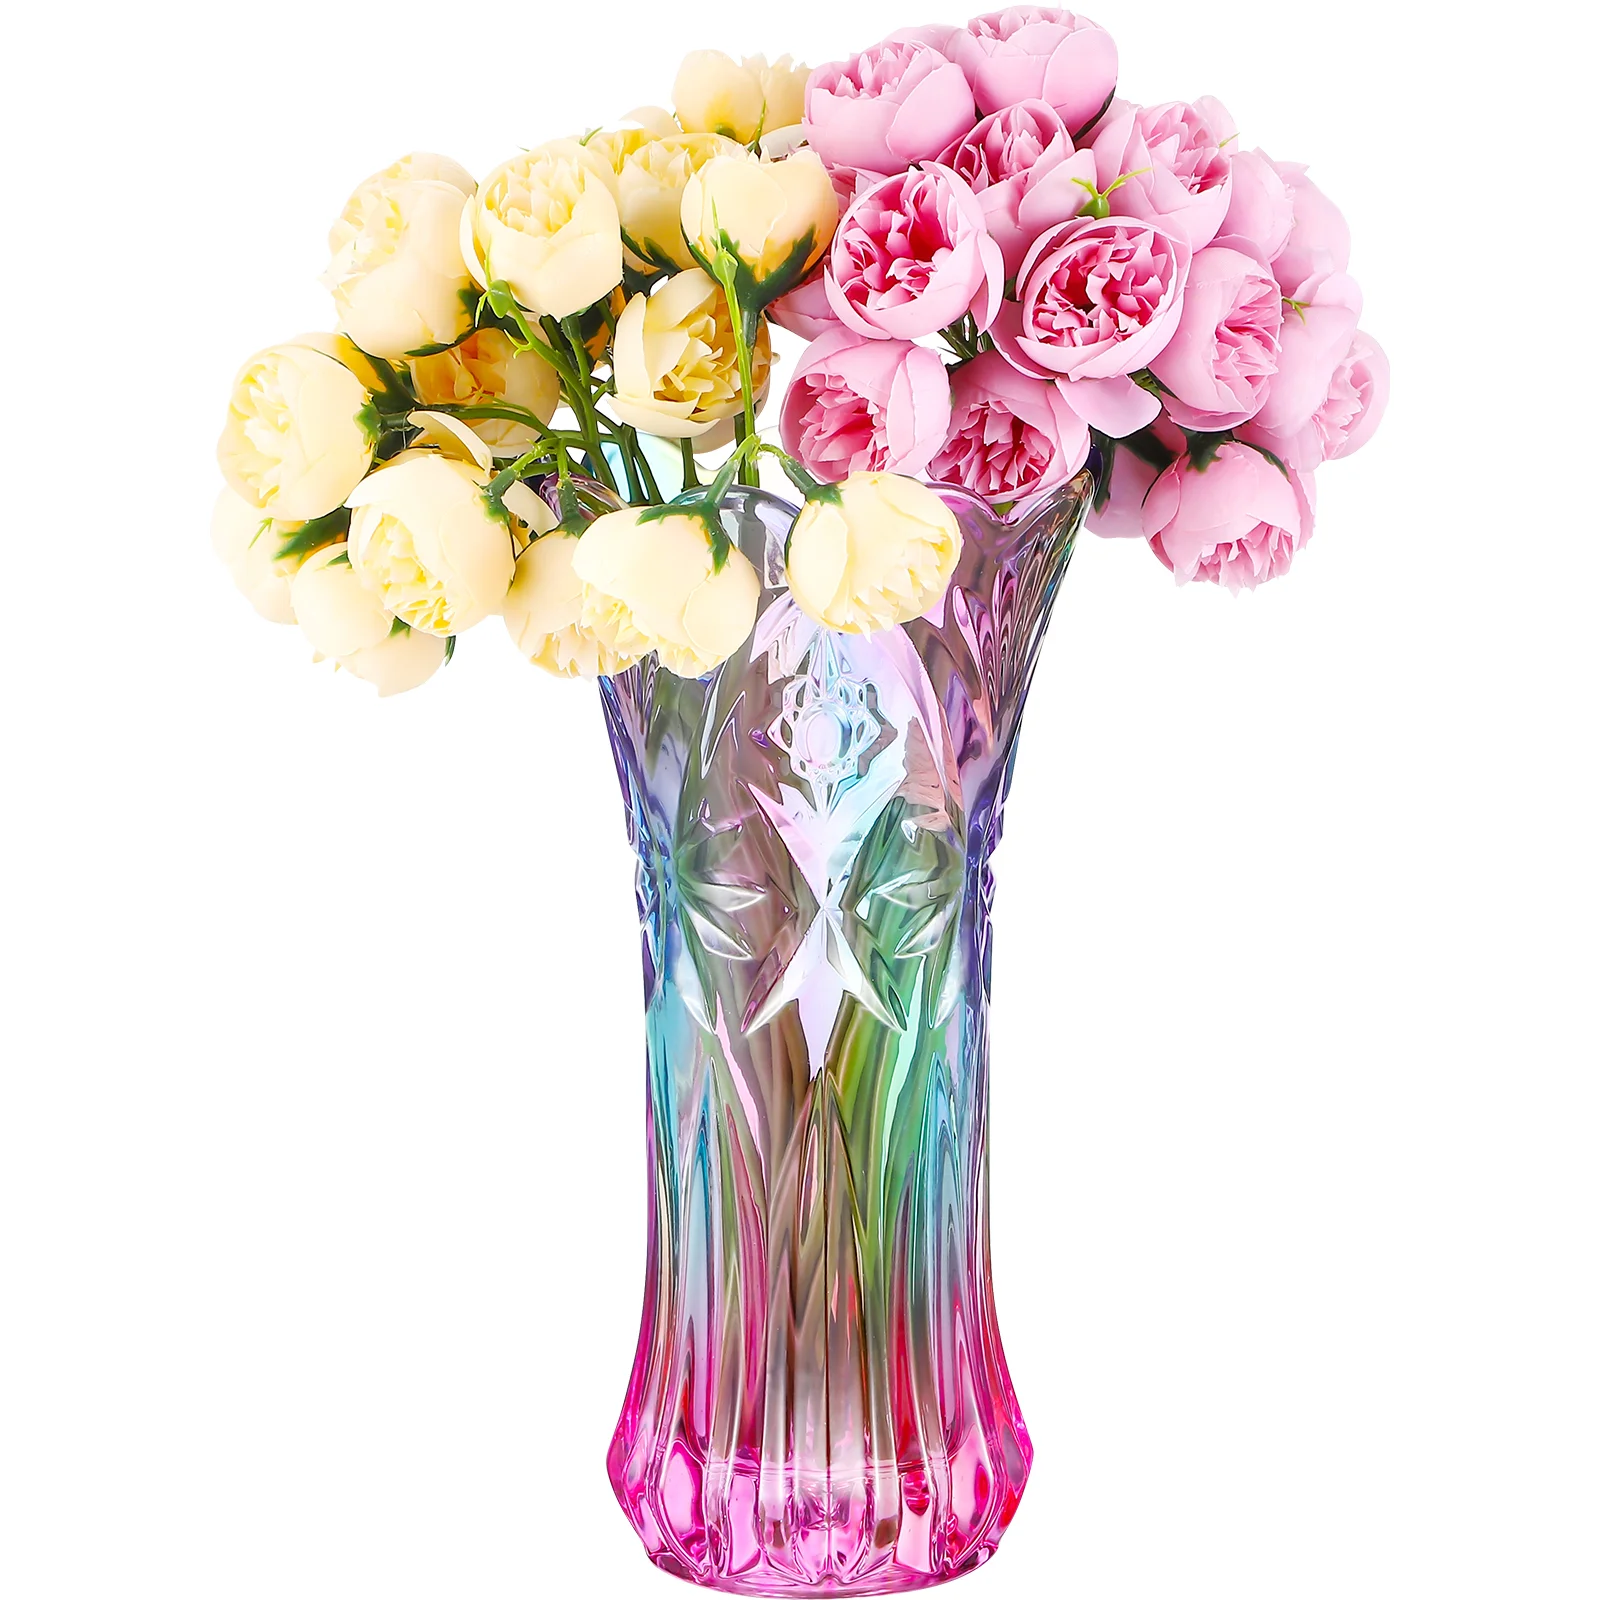 

Vase Flower Crystal Vases Flowers Rainbow Decorative Container Colorful Clear Decor Desktop Home Large Tail Jardiniere Shape